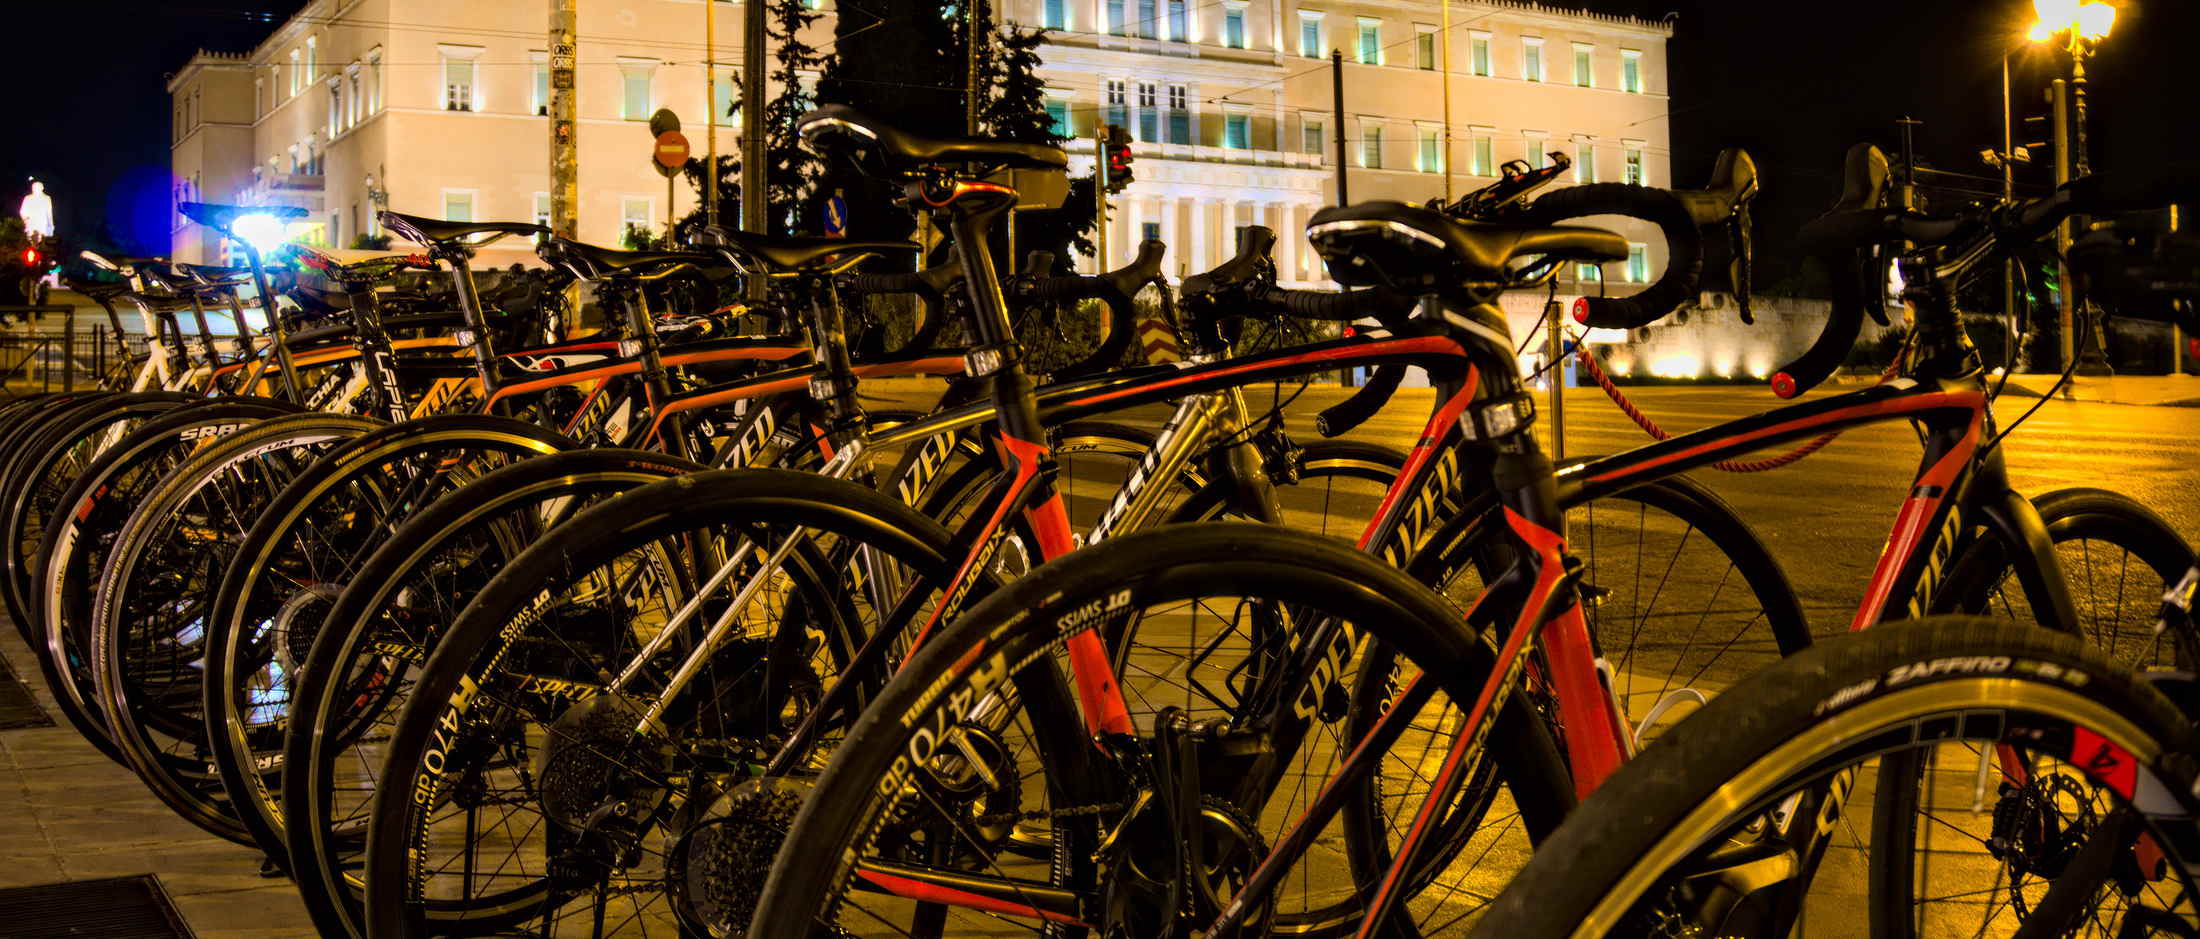 Road bikes on Syntagma square in Athens, Greece with the parliament in the background.